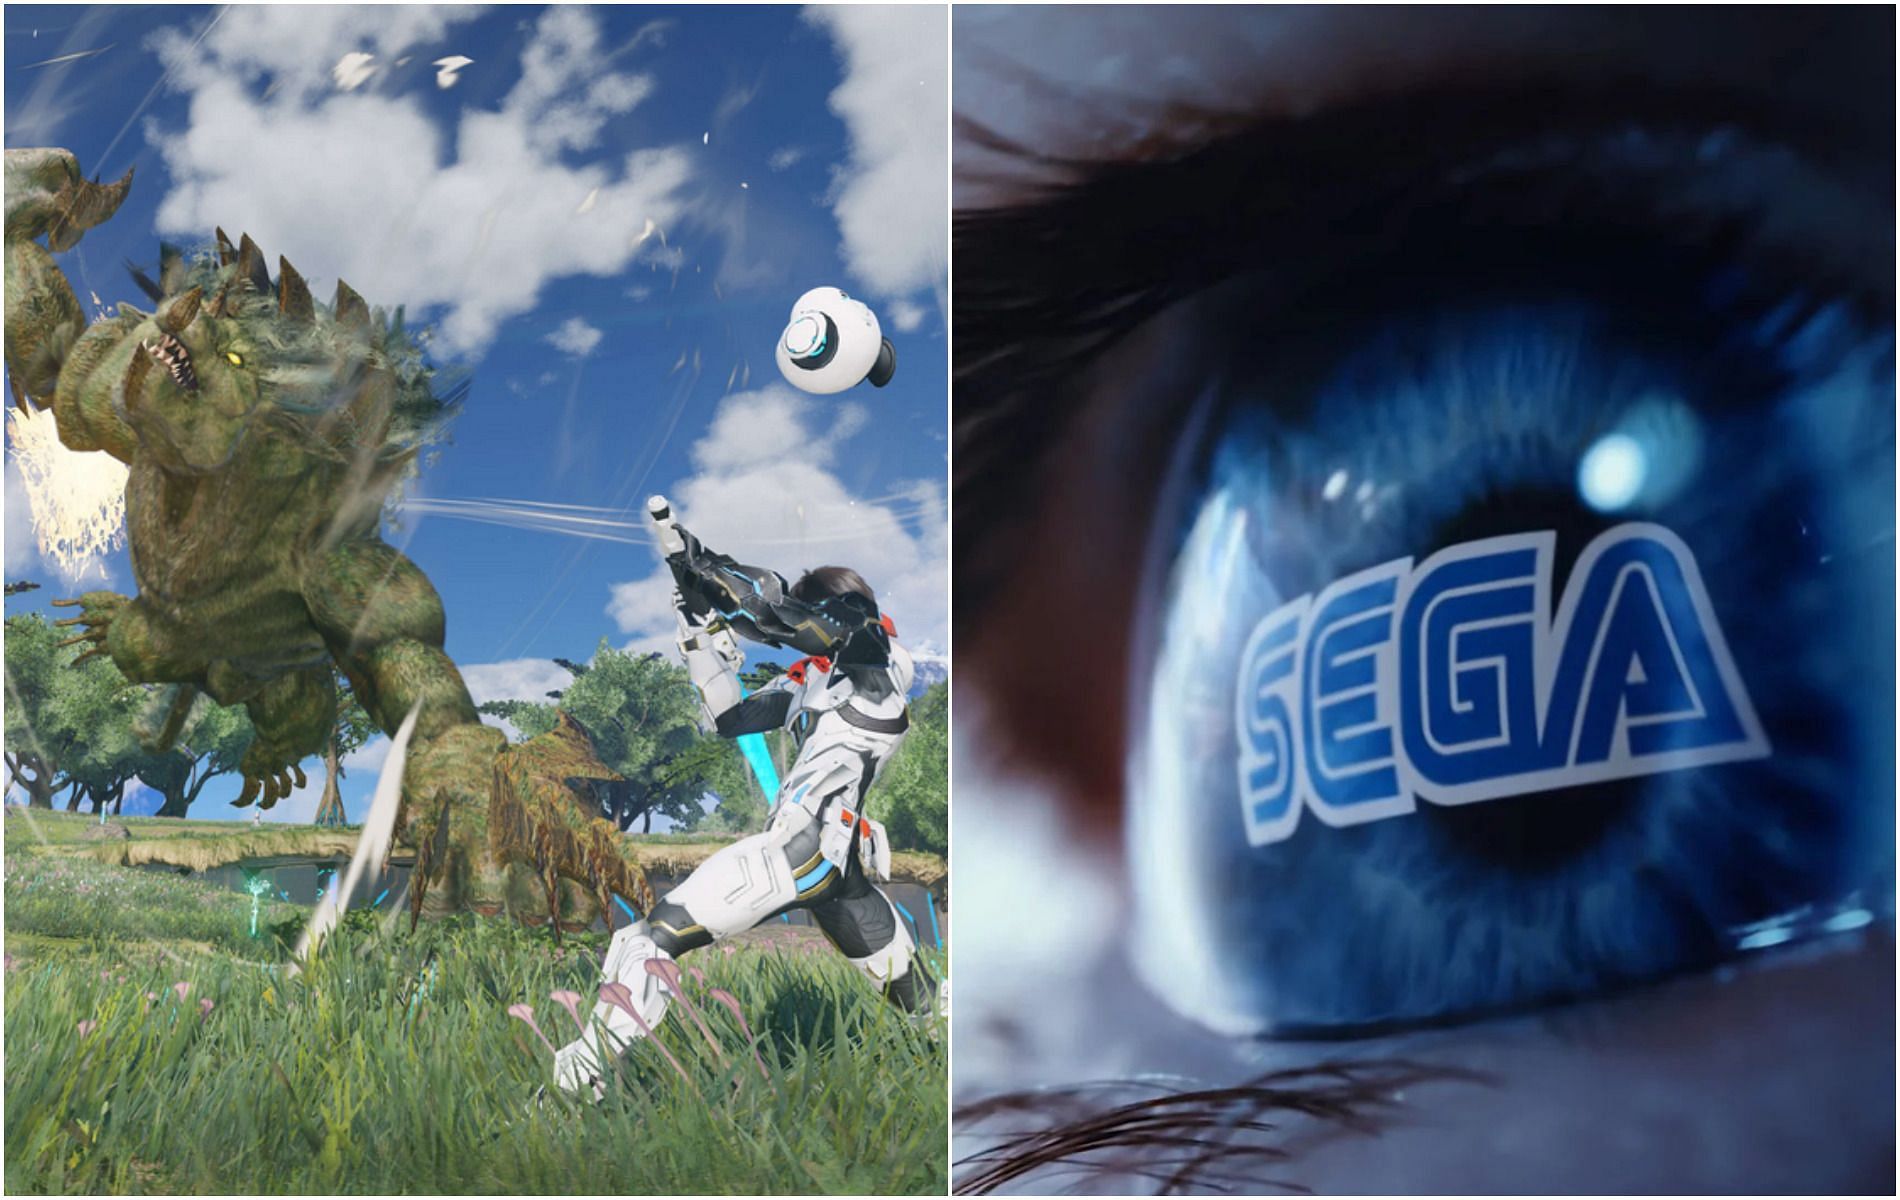 The renowned MMO will be seeing some changes over the next couple of months (Images via Sega)